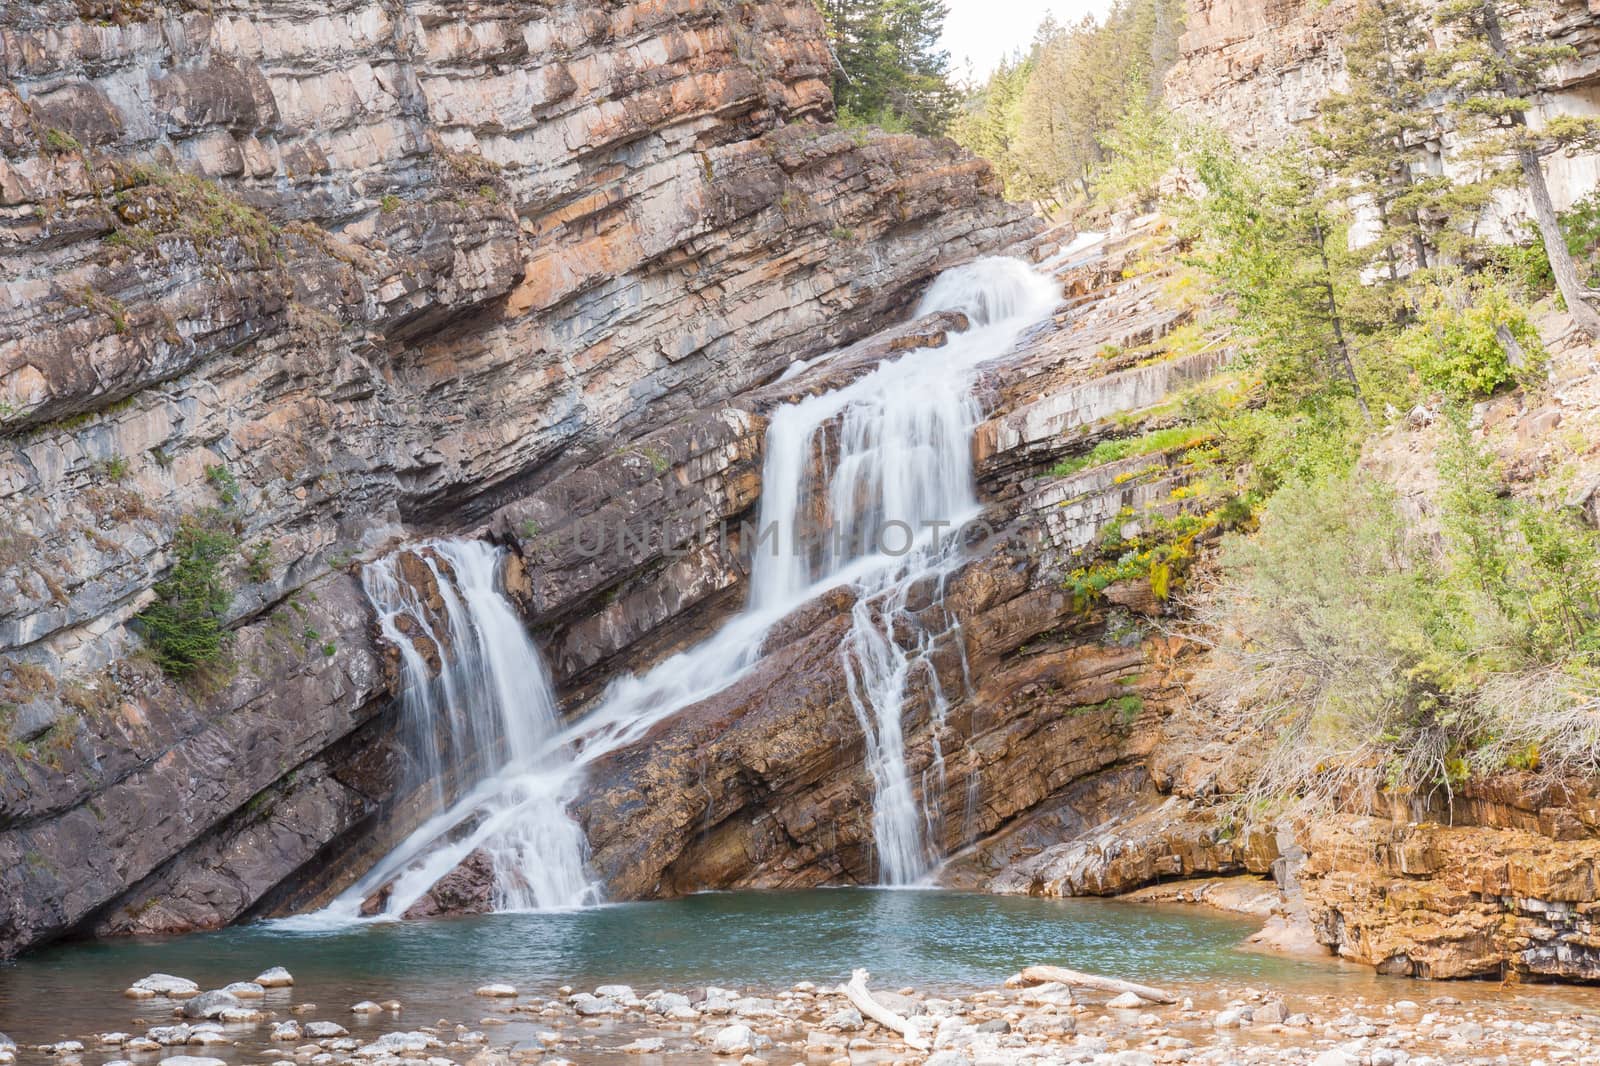 This is Cameron Falls in Waterton Townsite next to Waterton National Park, Canada. The slope of the rocks and the channel the water flows through results in a unique looking waterfall.